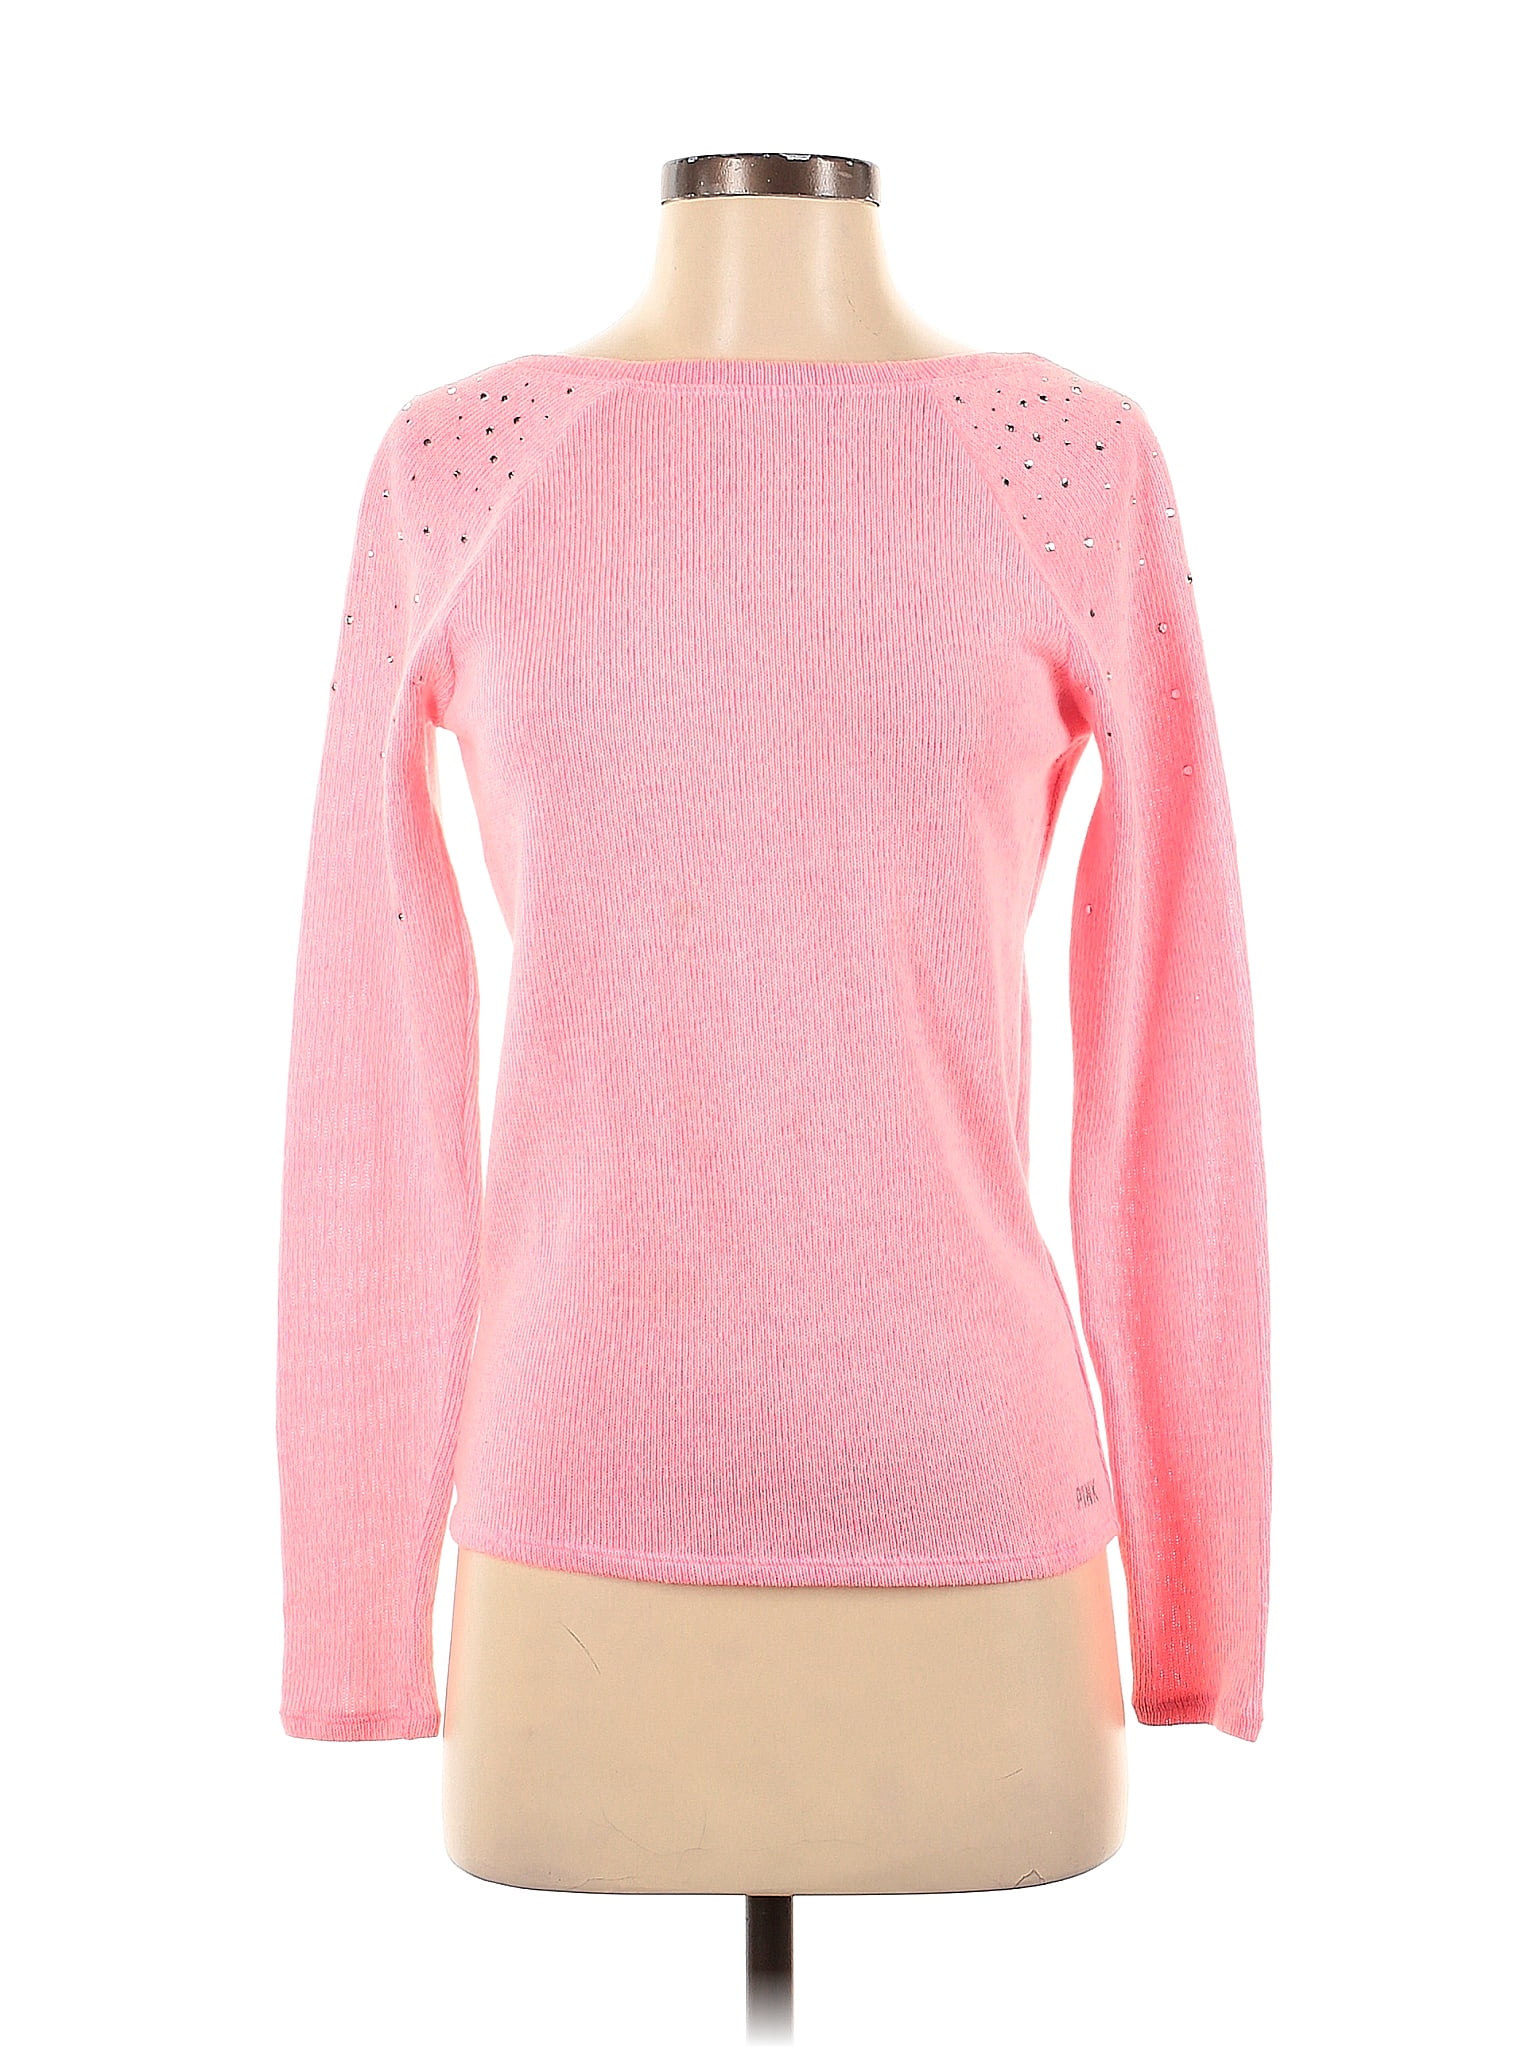 Victoria's Secret Pink Color Block Solid Pink Pullover Sweater